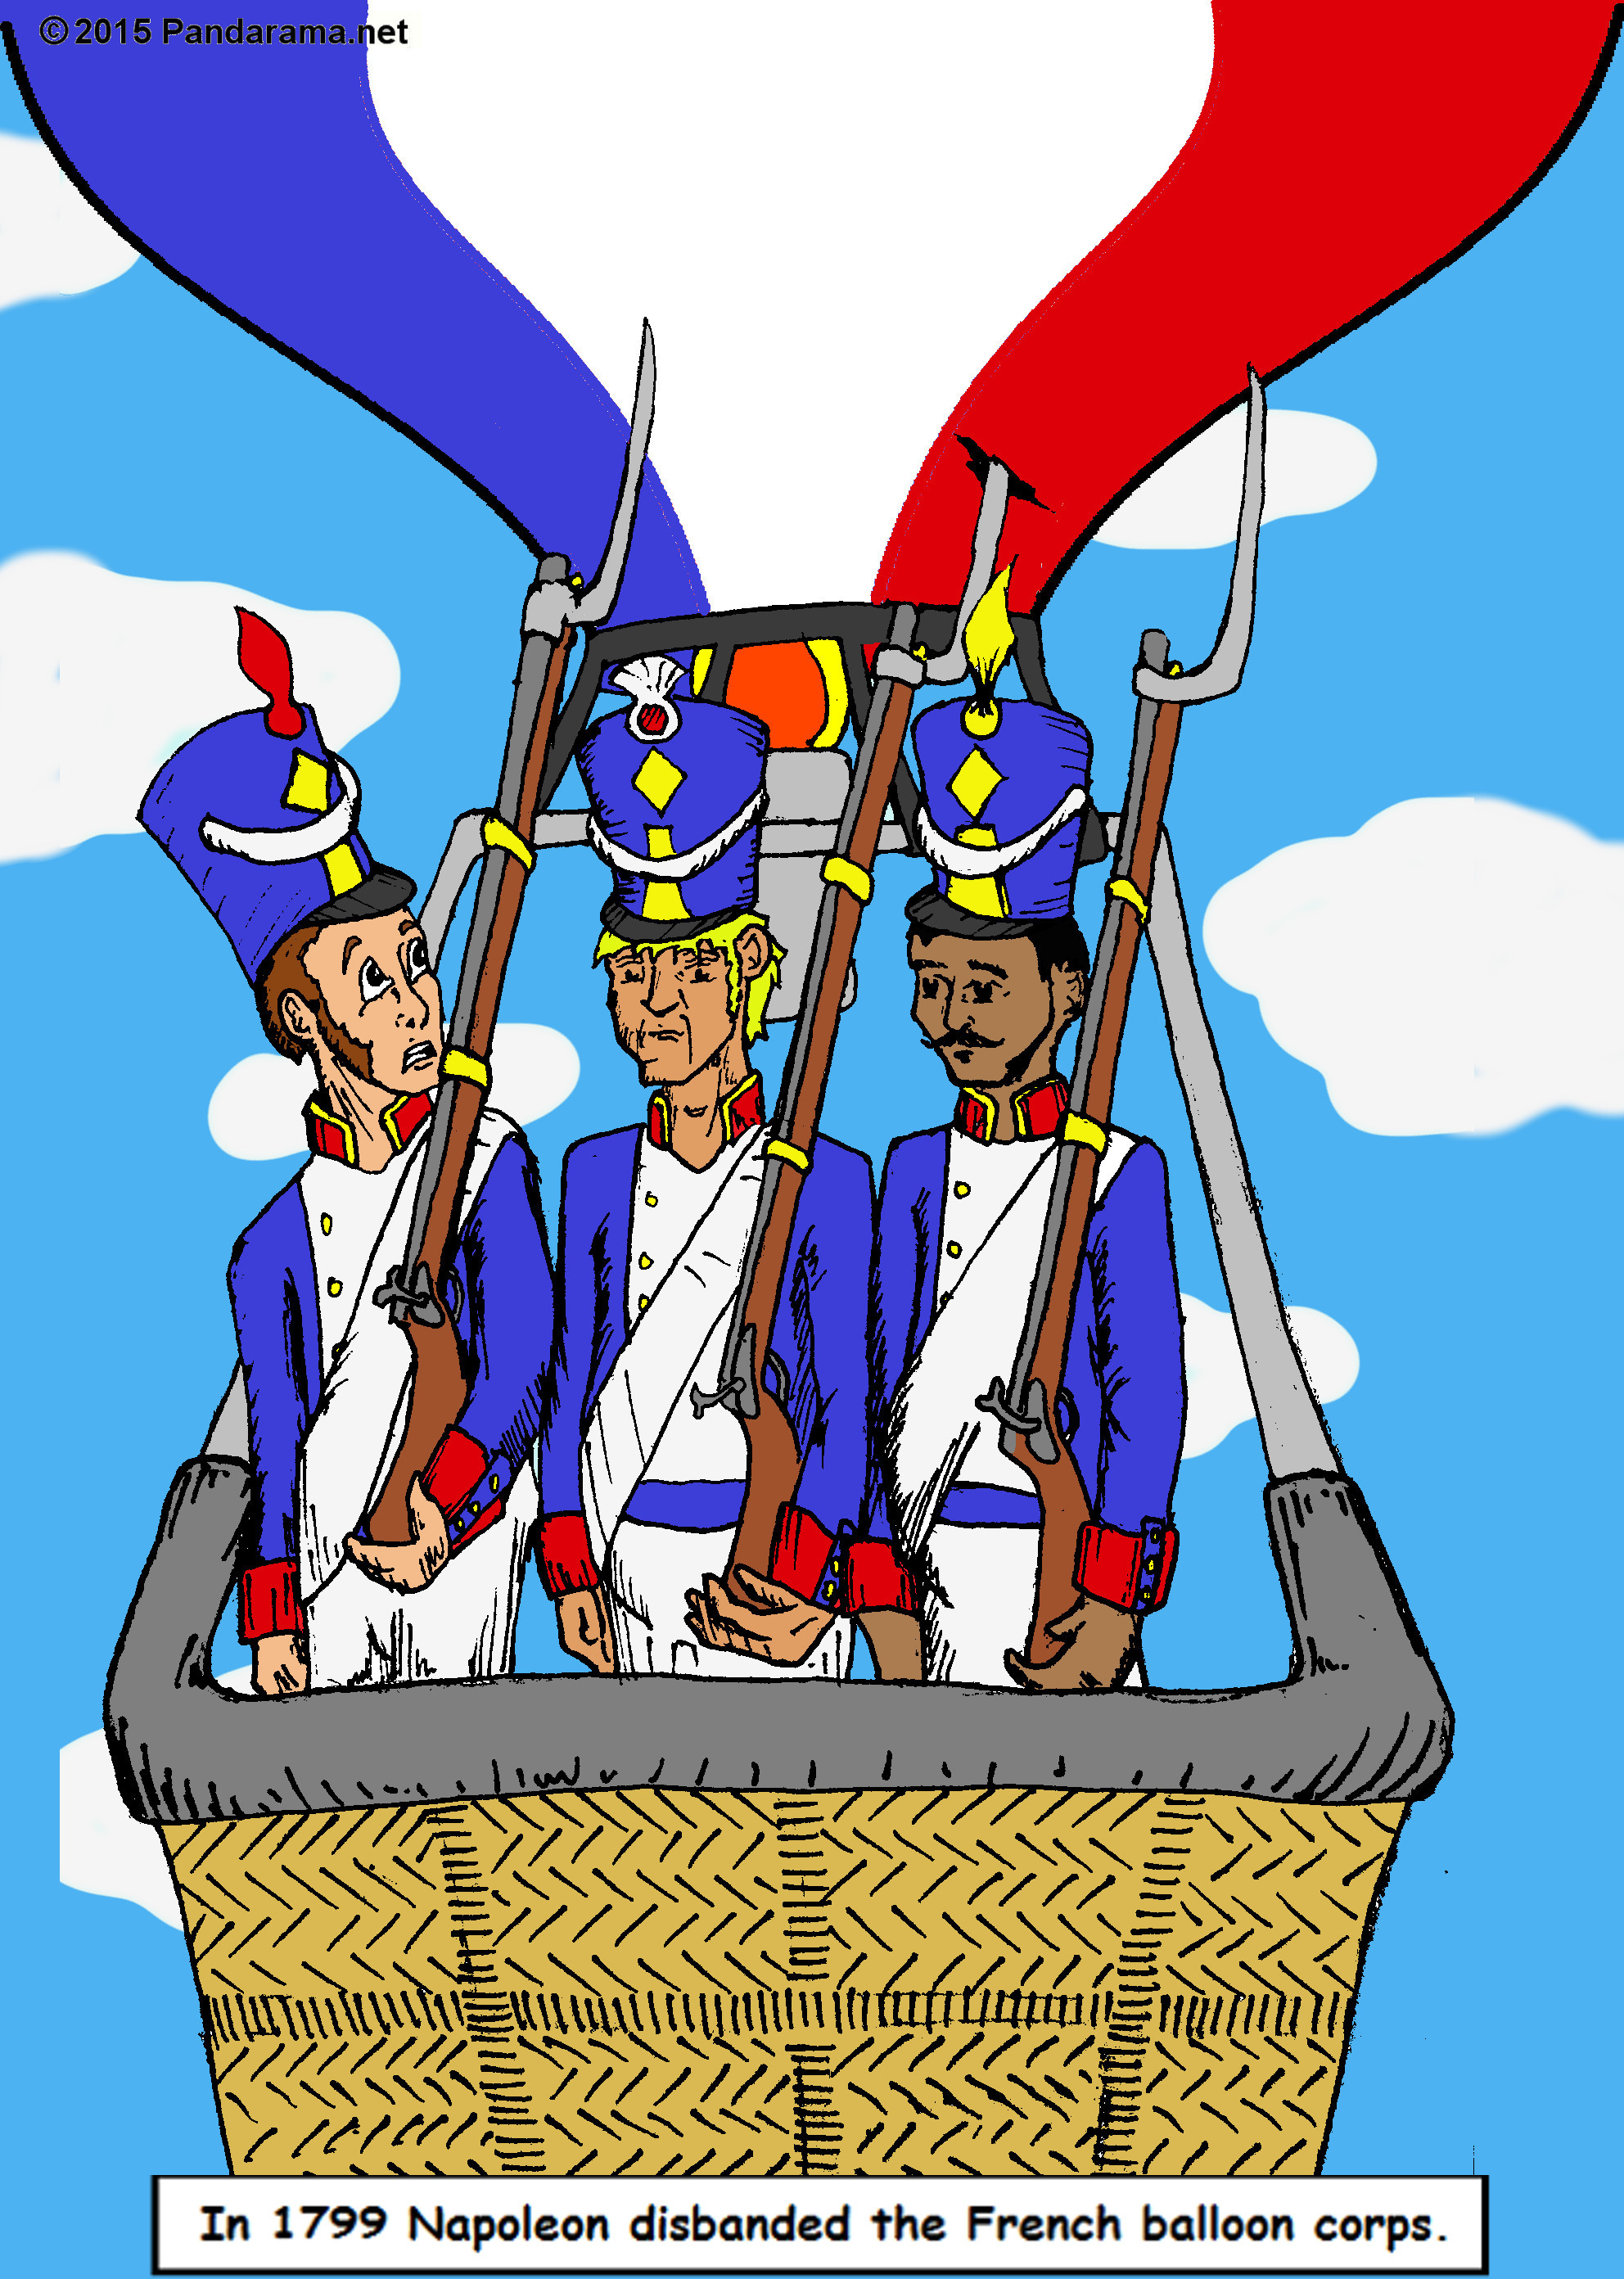 Pandarama cartoon of three Napoleonic soldiers lined up in a balloon, one of their bayonettes has punctured the balloon.